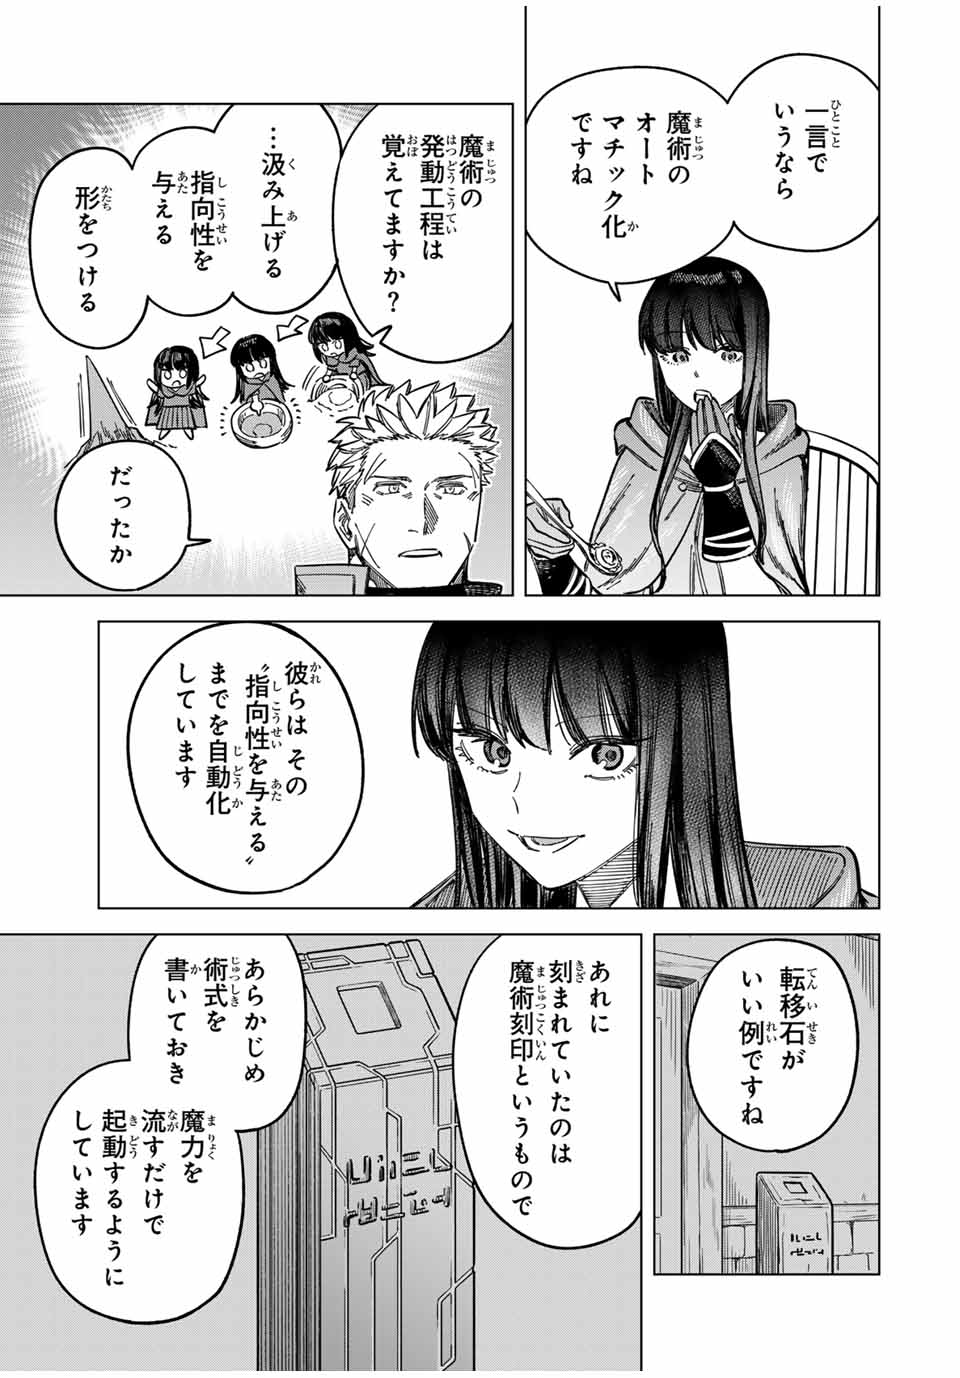 Witch and Mercenary 魔女と傭兵 第6話 - Page 9